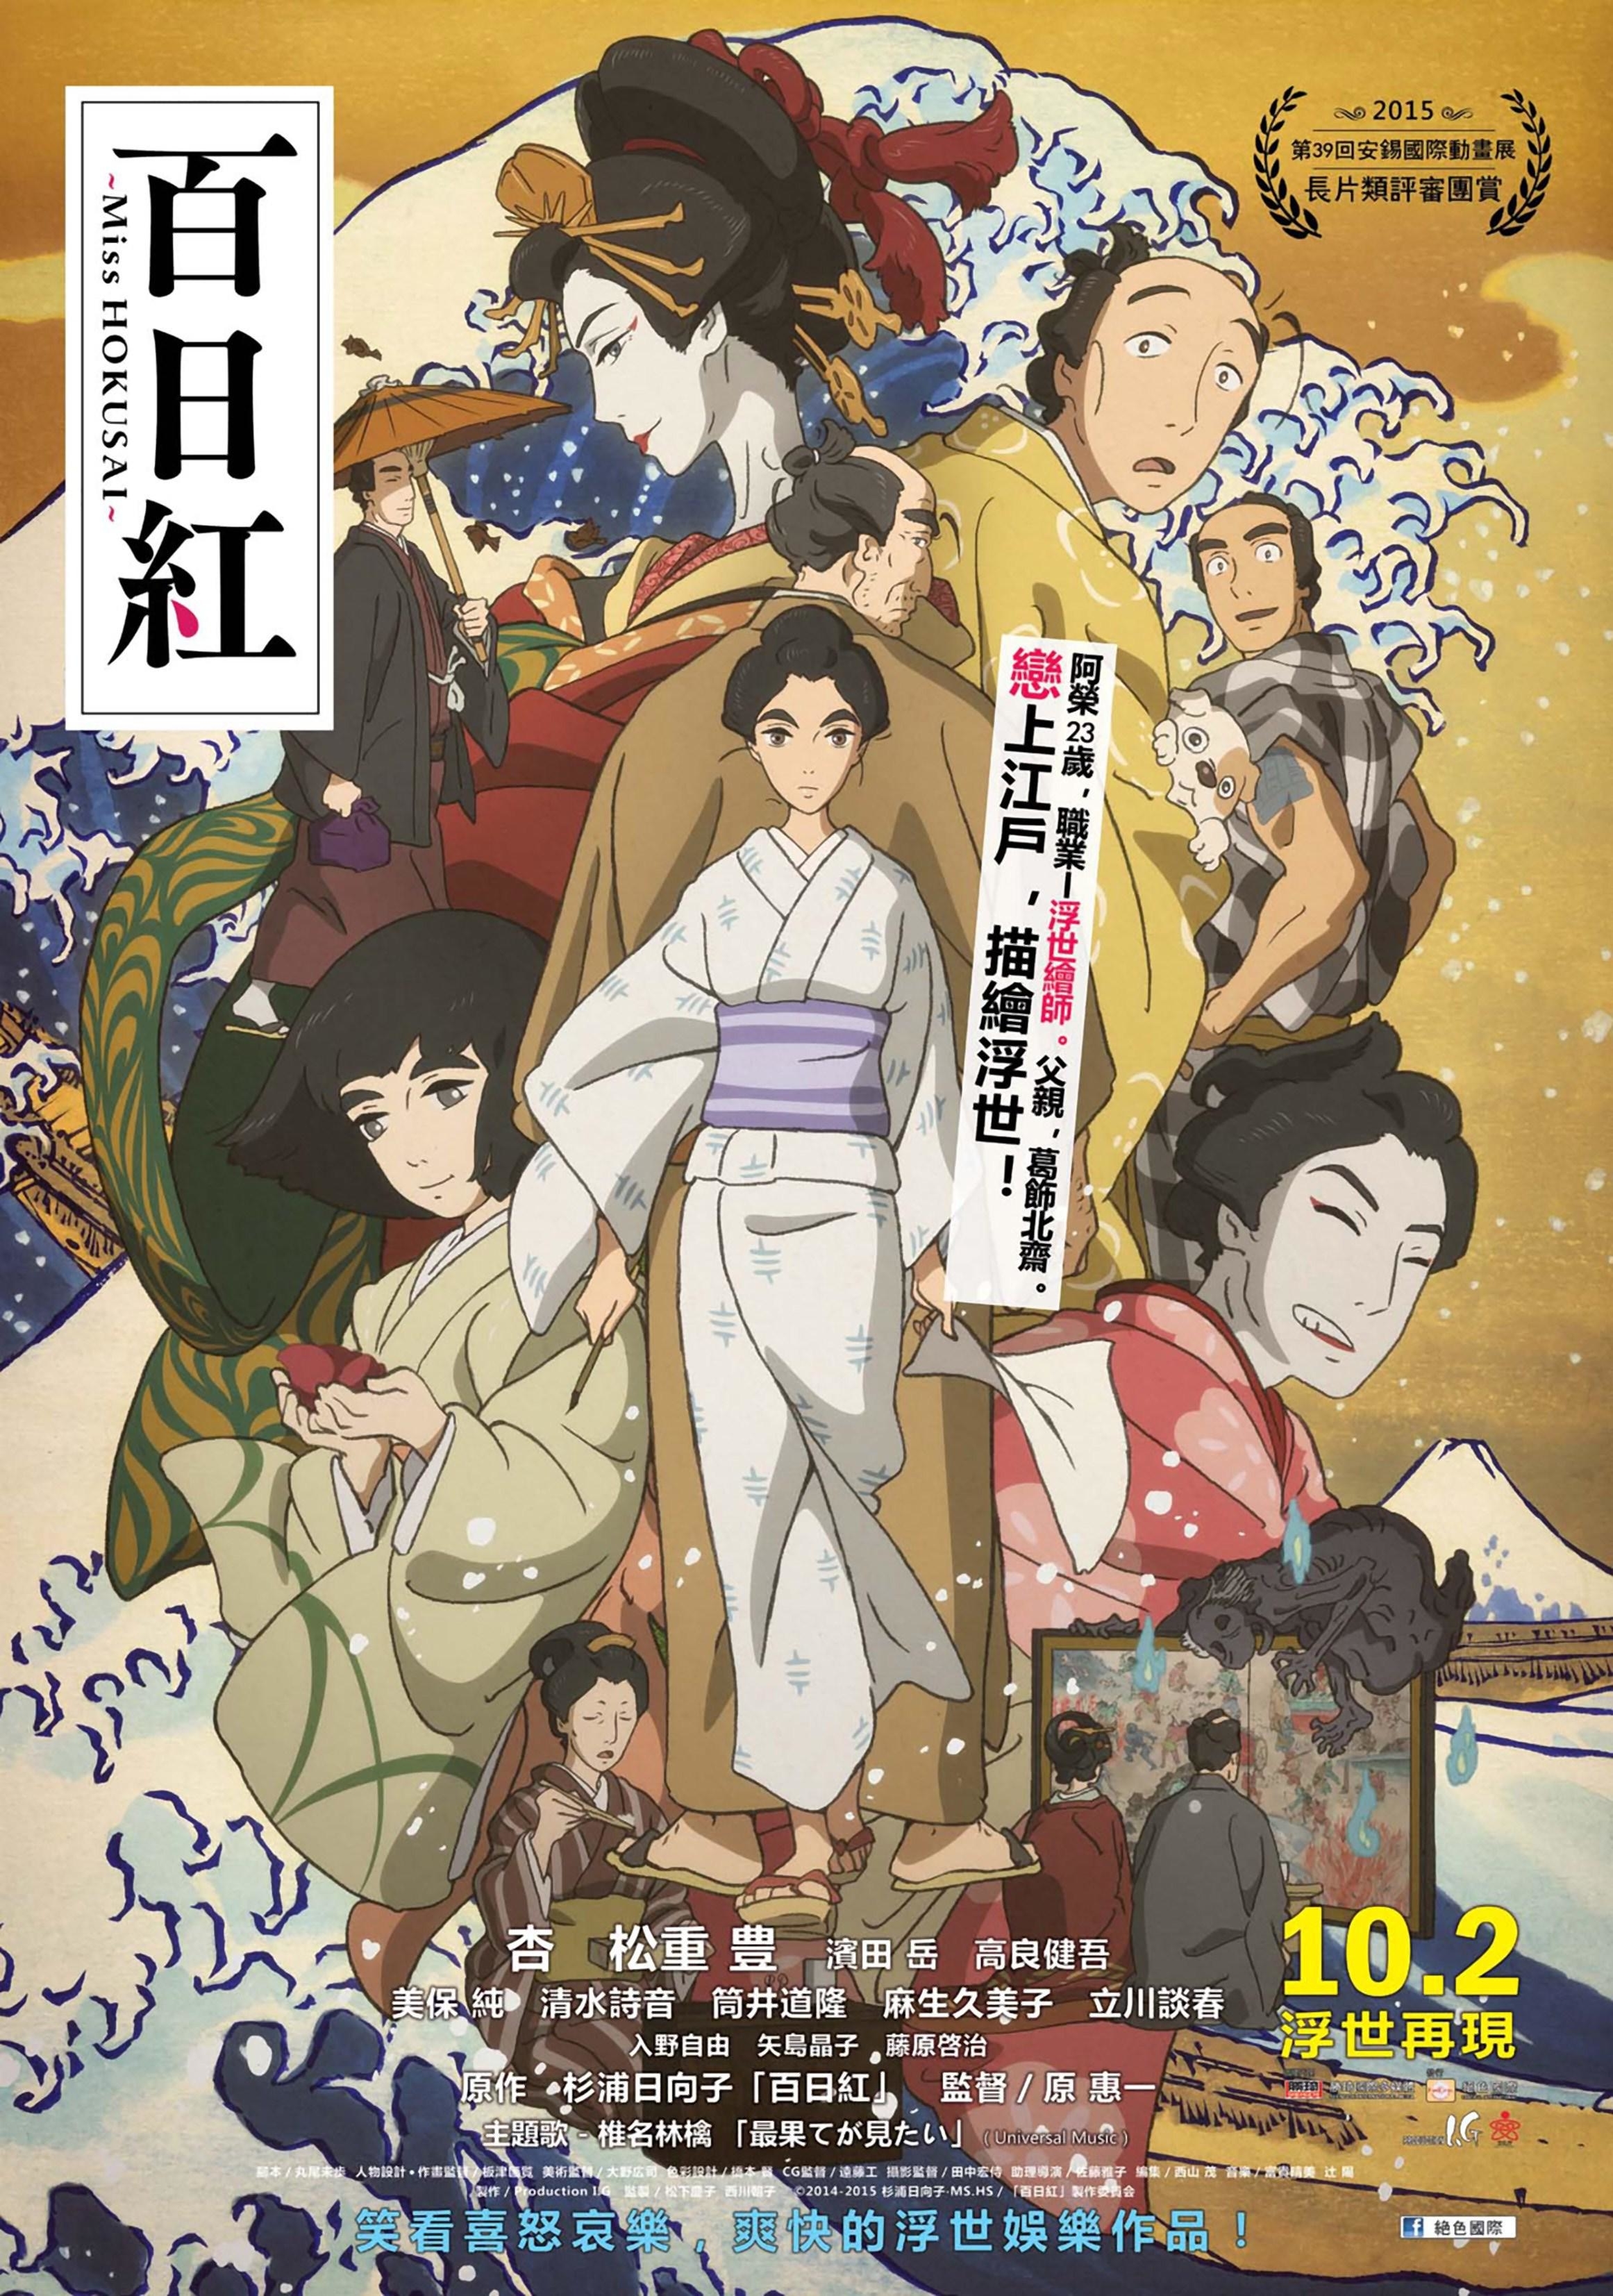 Poster image for the animated film Miss Hokusai, featuring a collage of all the main characters and a wave in the background.